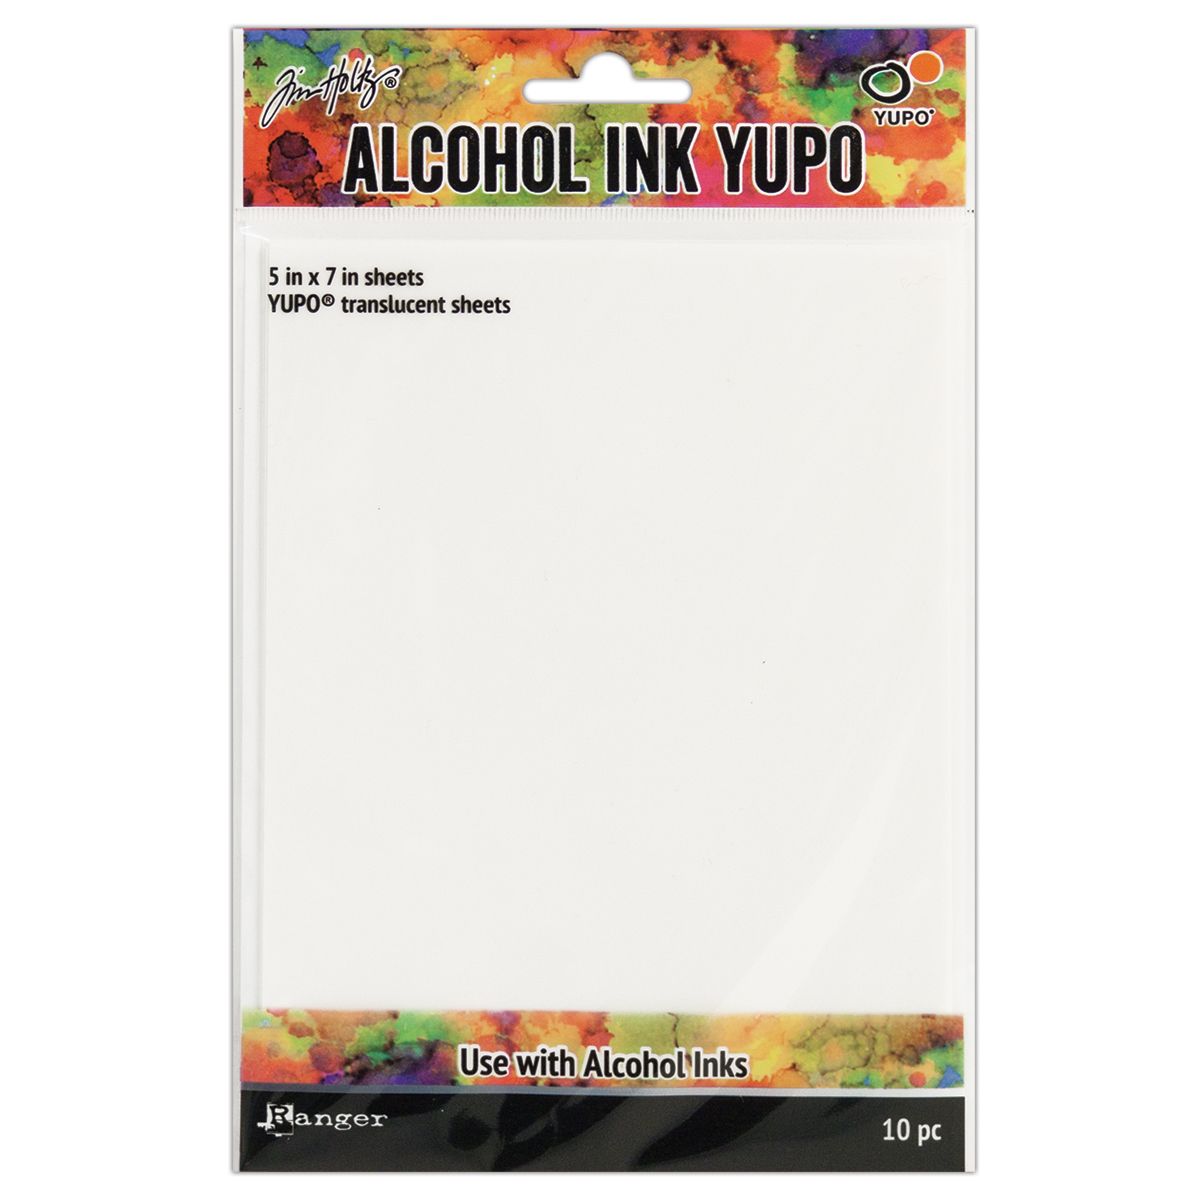 Tim Holtz Alcohol Ink Yupo Translucent Sheets (5x7in) 10pc